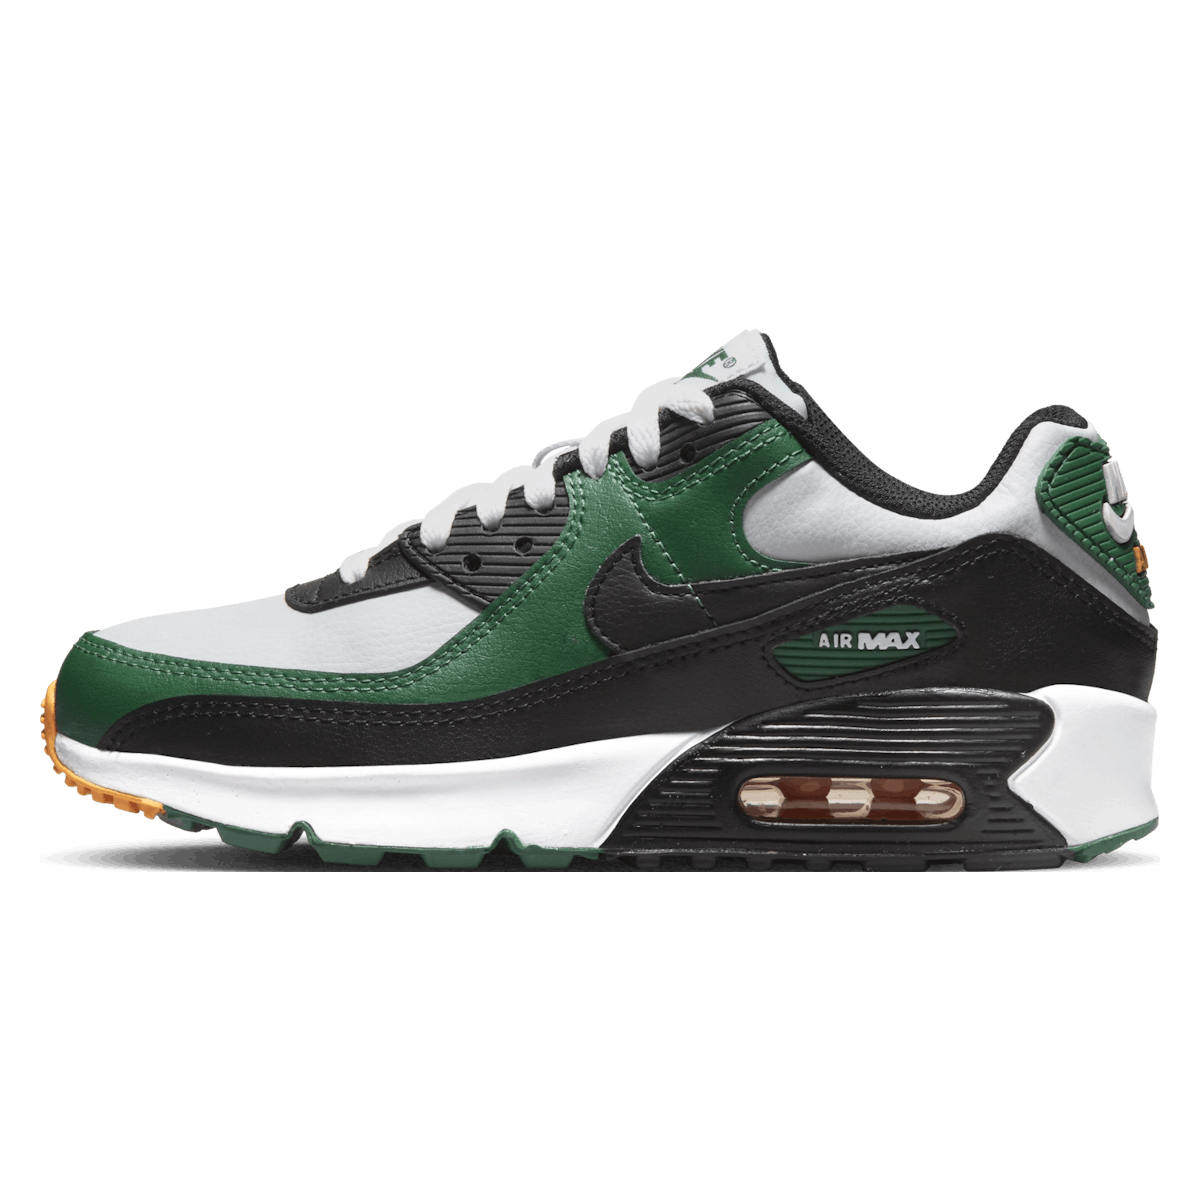 Nike Air Max 90 Leather Pure Platinum Gorge Green (GS)